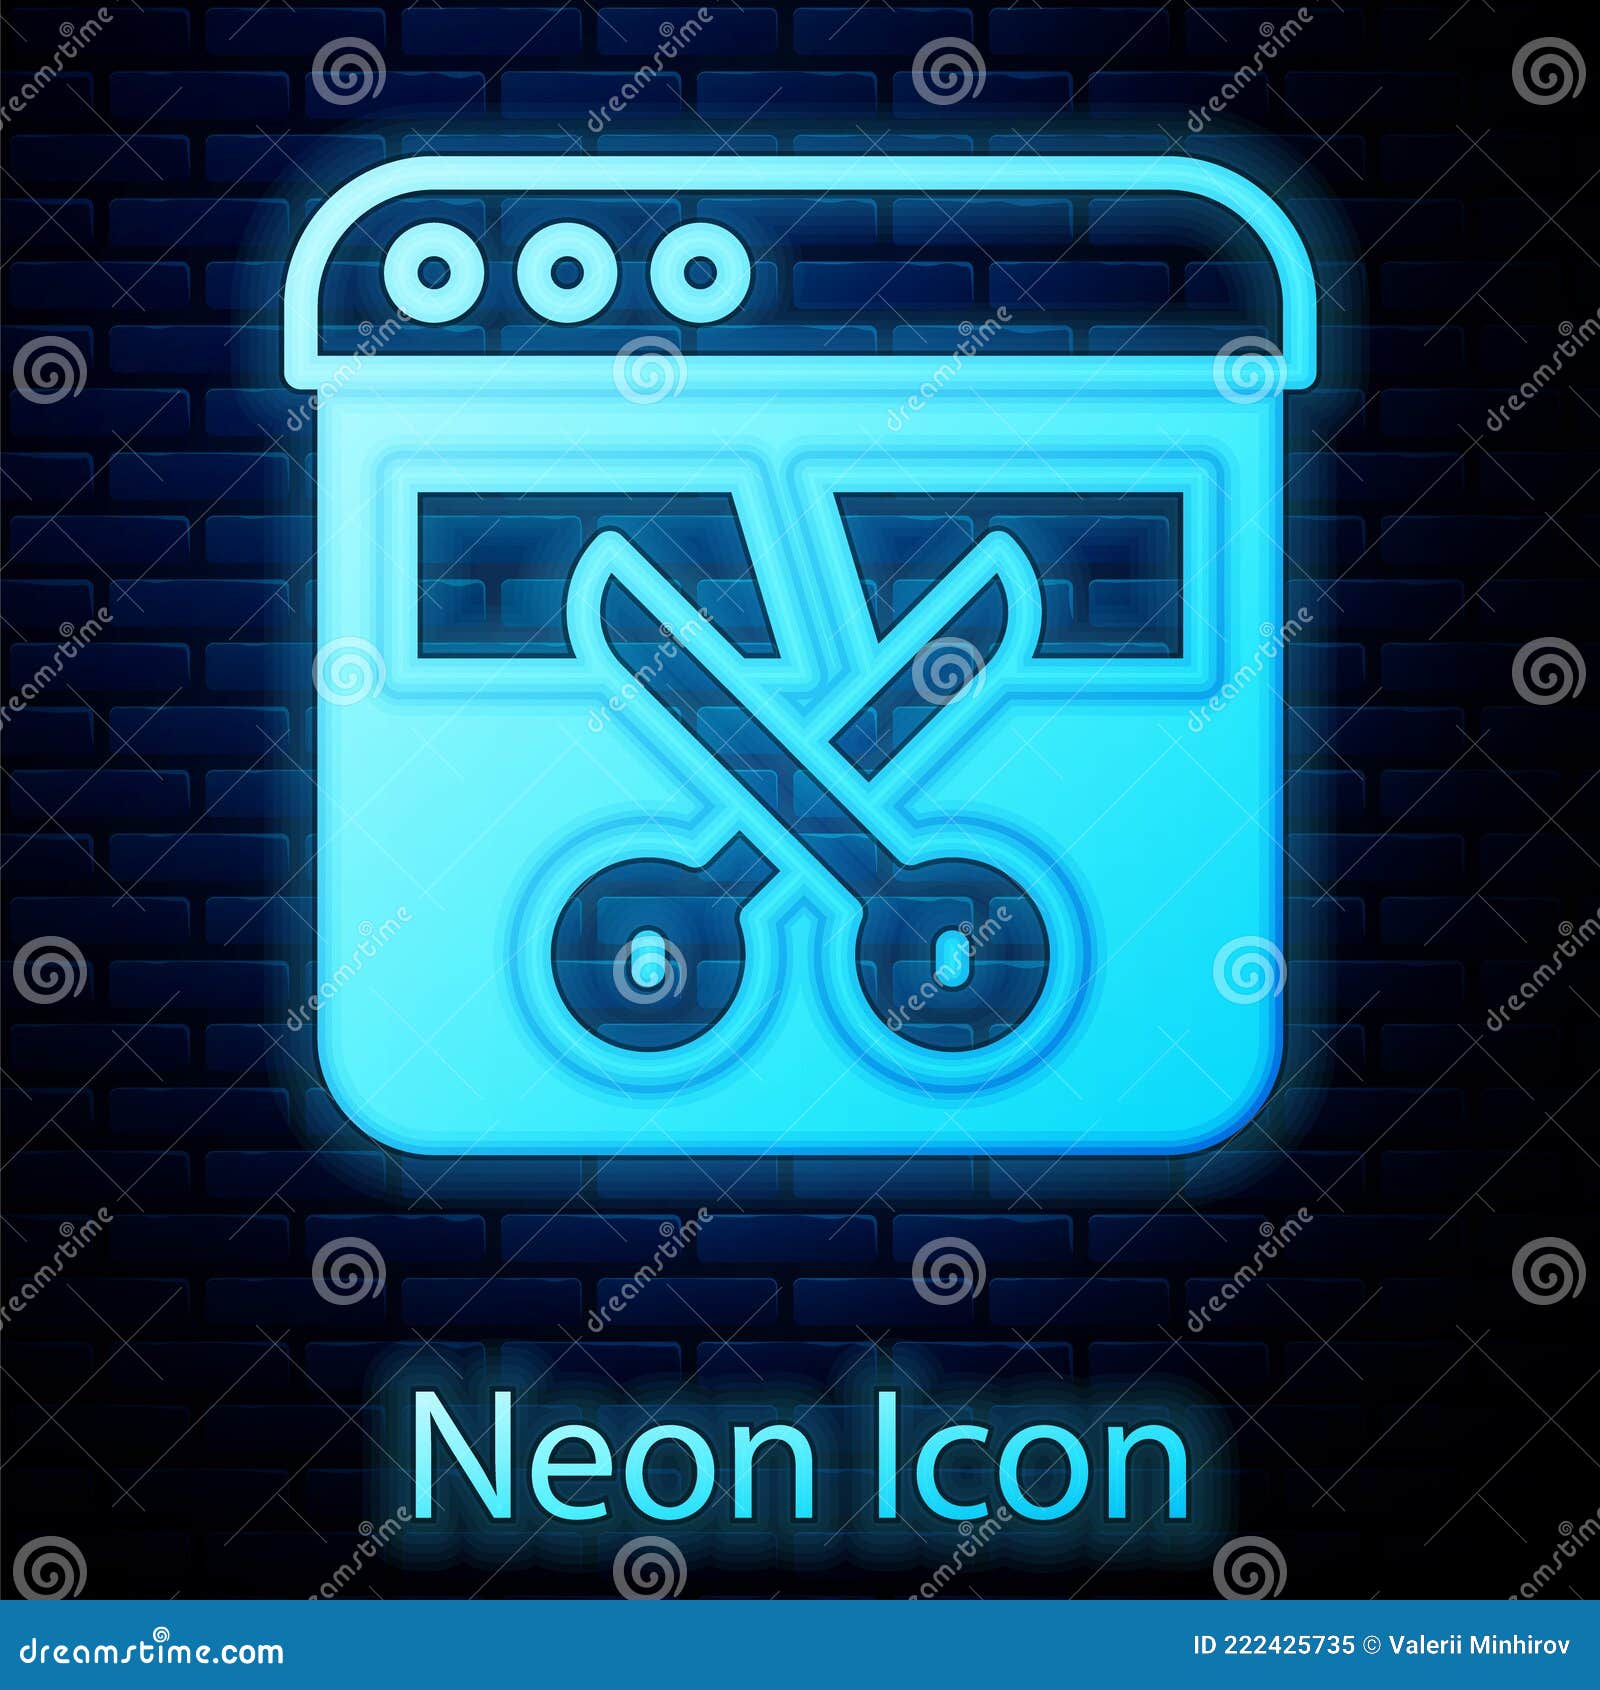 Glowing Neon Video Recorder or Editor Software on Laptop Icon Isolated on  Brick Wall Background. Video Editing on a Stock Vector - Illustration of  bright, isolated: 222425735